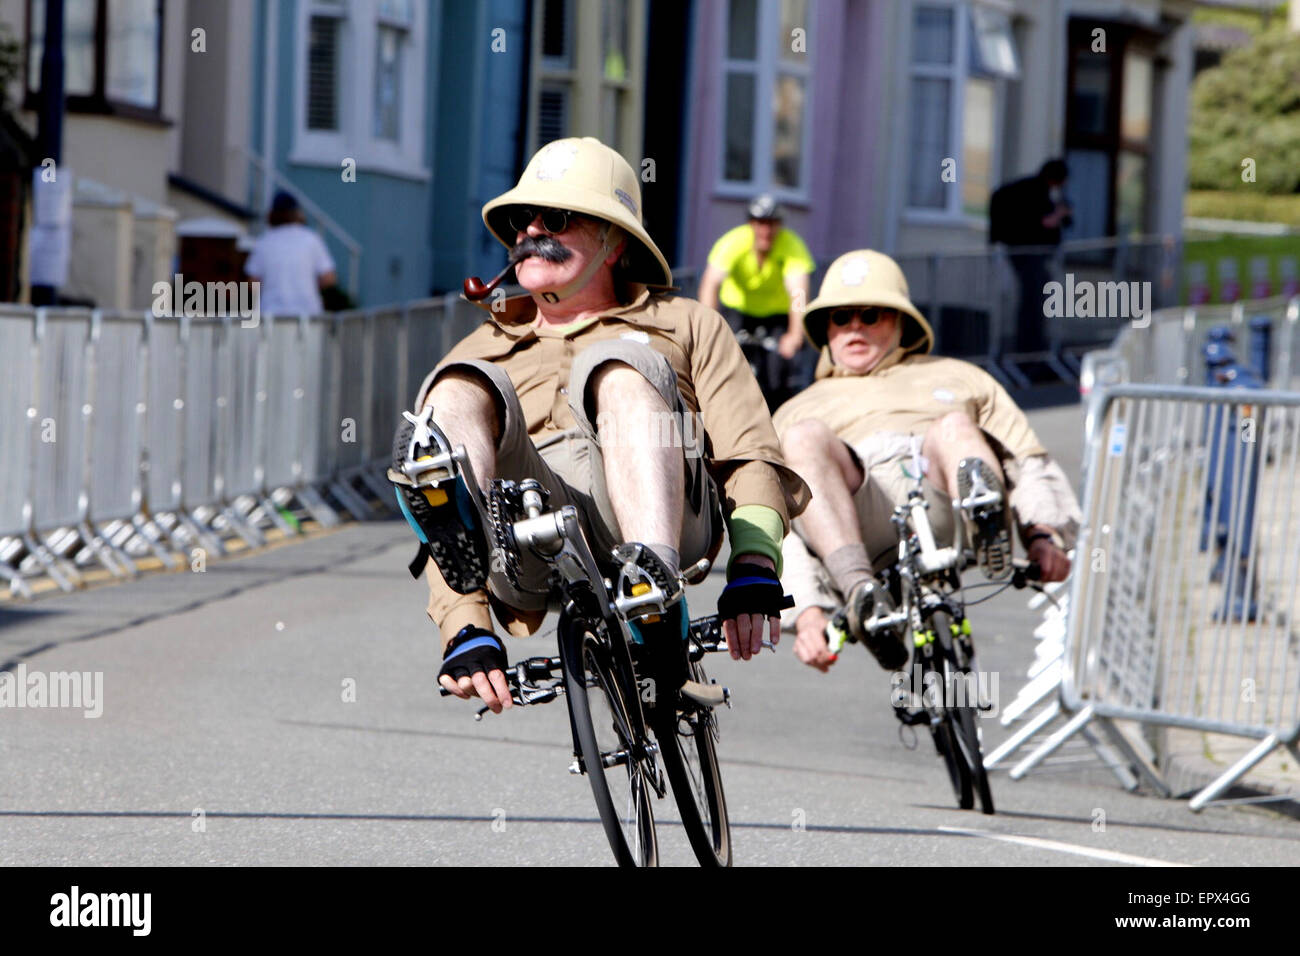 Aberystwyth, UK. 22nd May, 2015. Amatuer cyclists take part in Town vs Gown races ahead of the professional race in the Pearl Izumi Tour Series in Aberystwyth, UK. Racers on recline bikes dressed in jungle fatigues. Credit:  Jon Freeman/Alamy Live News Stock Photo